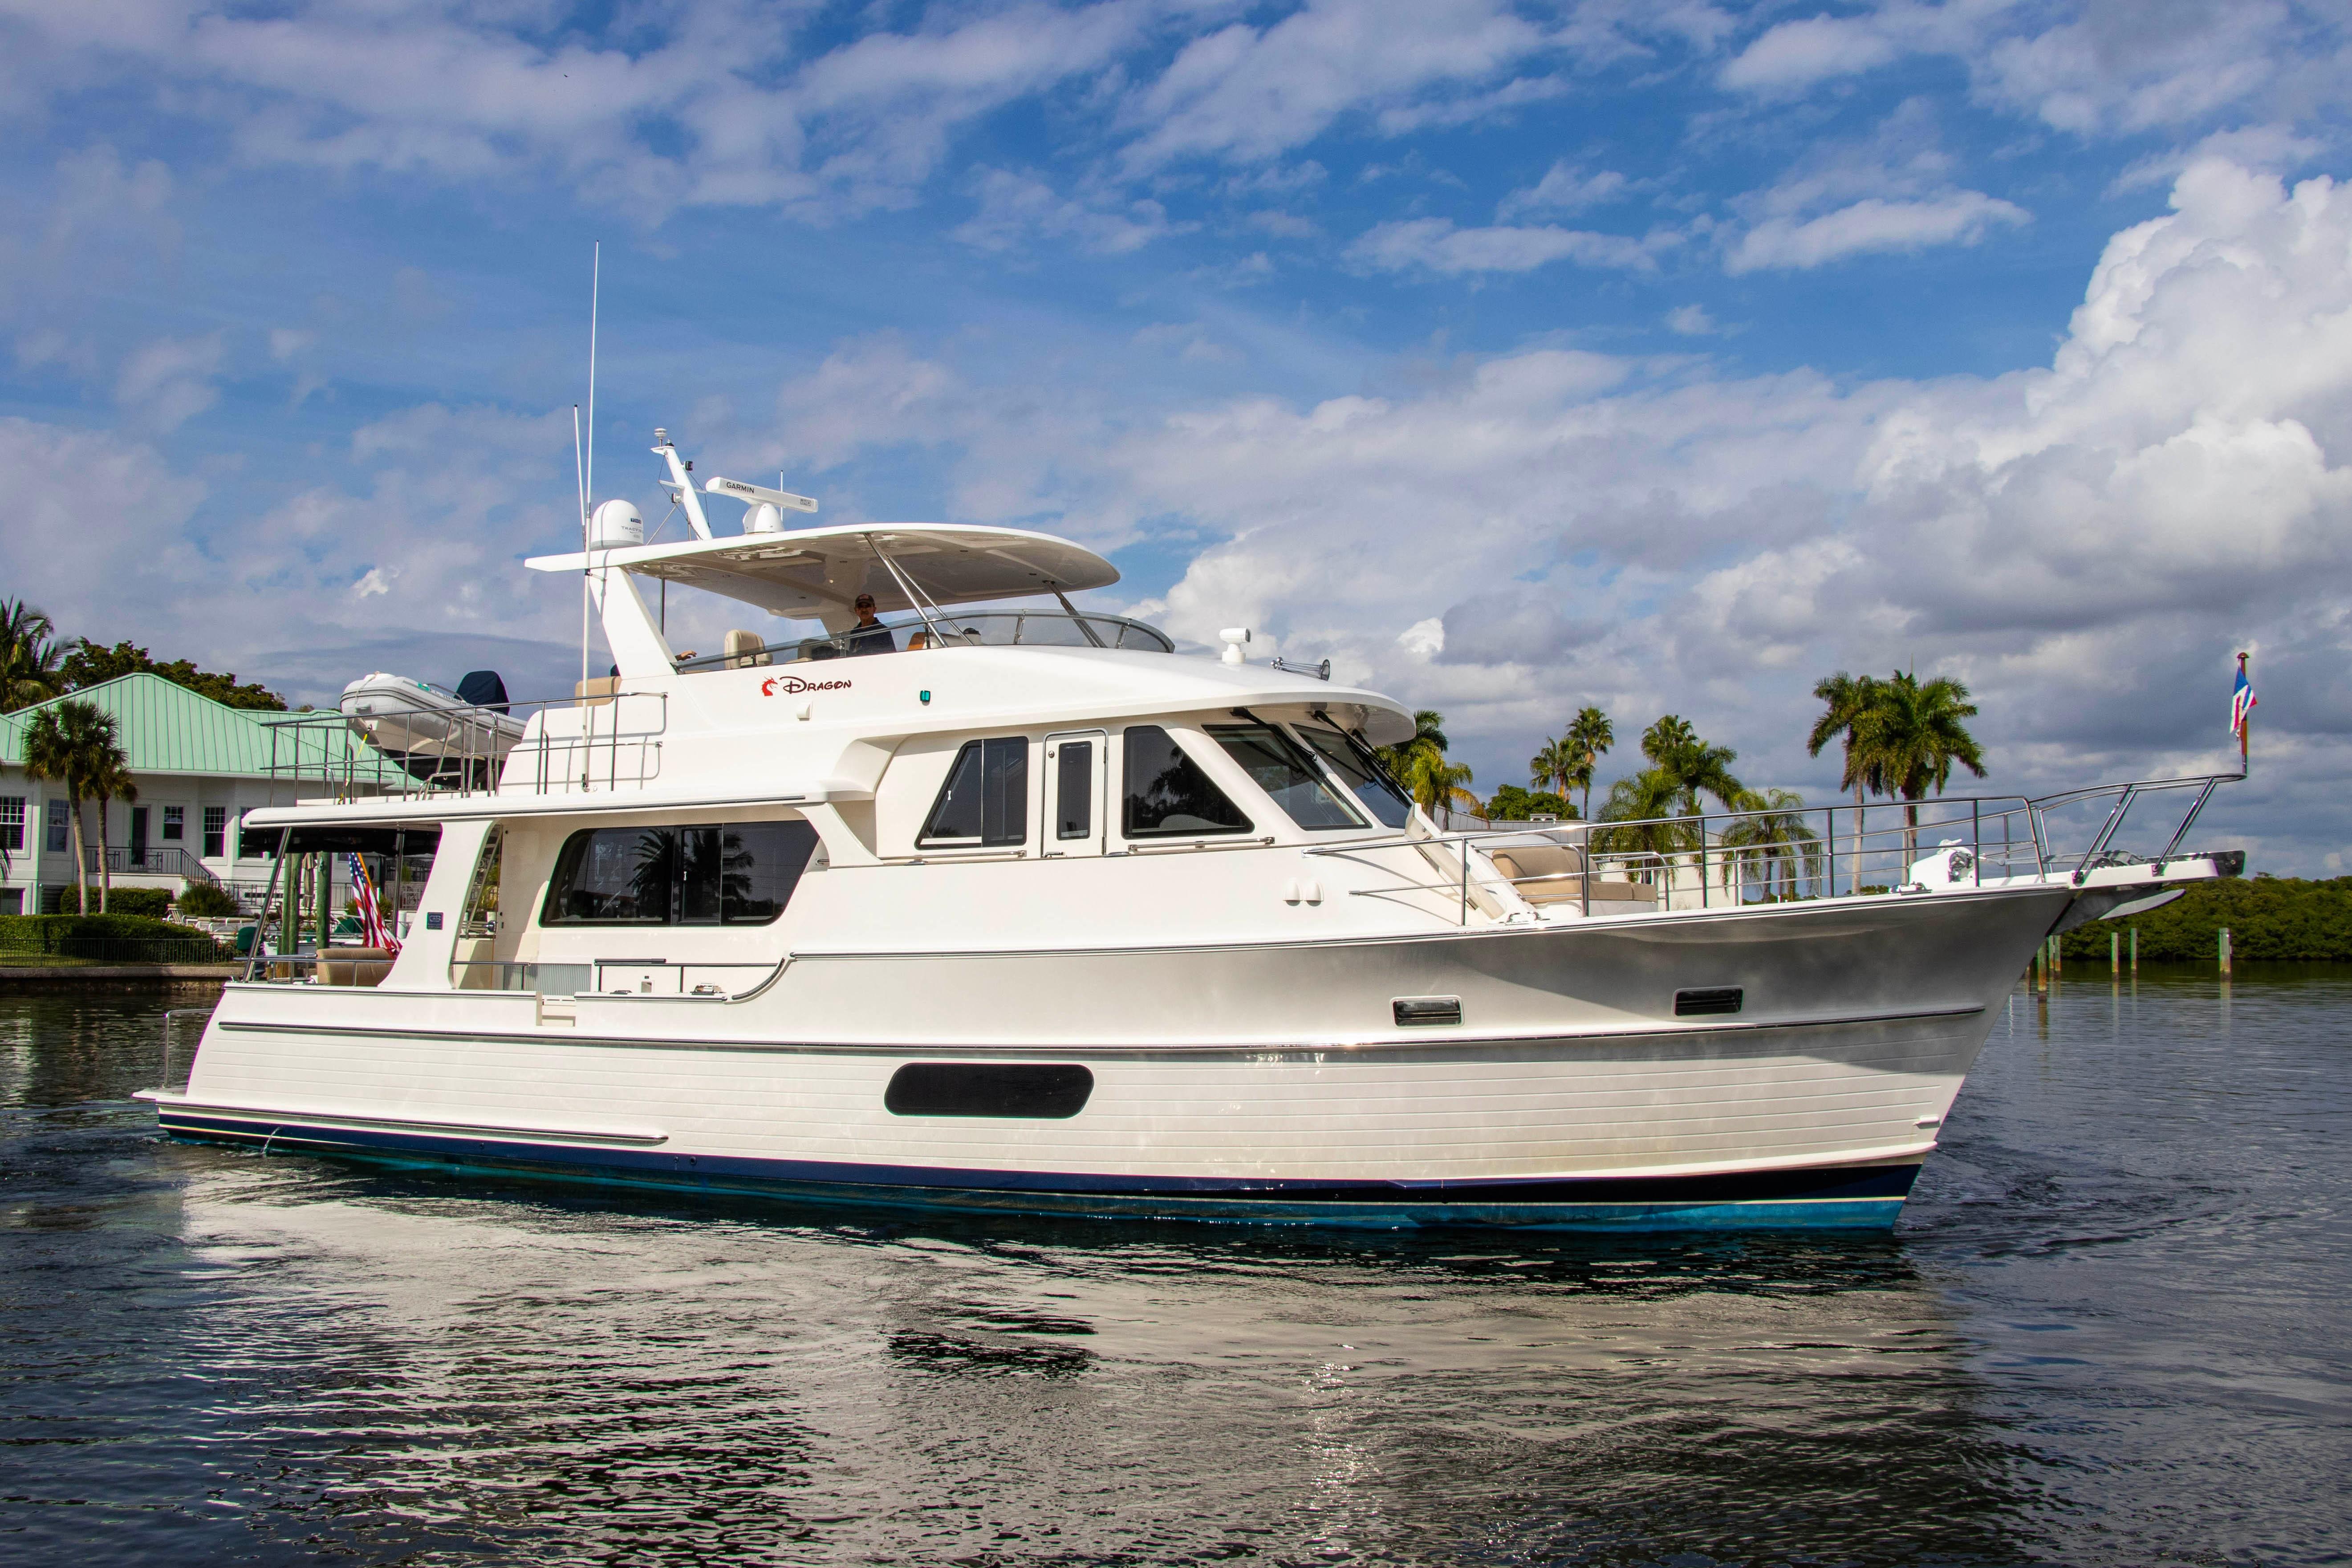 55' yacht for sale